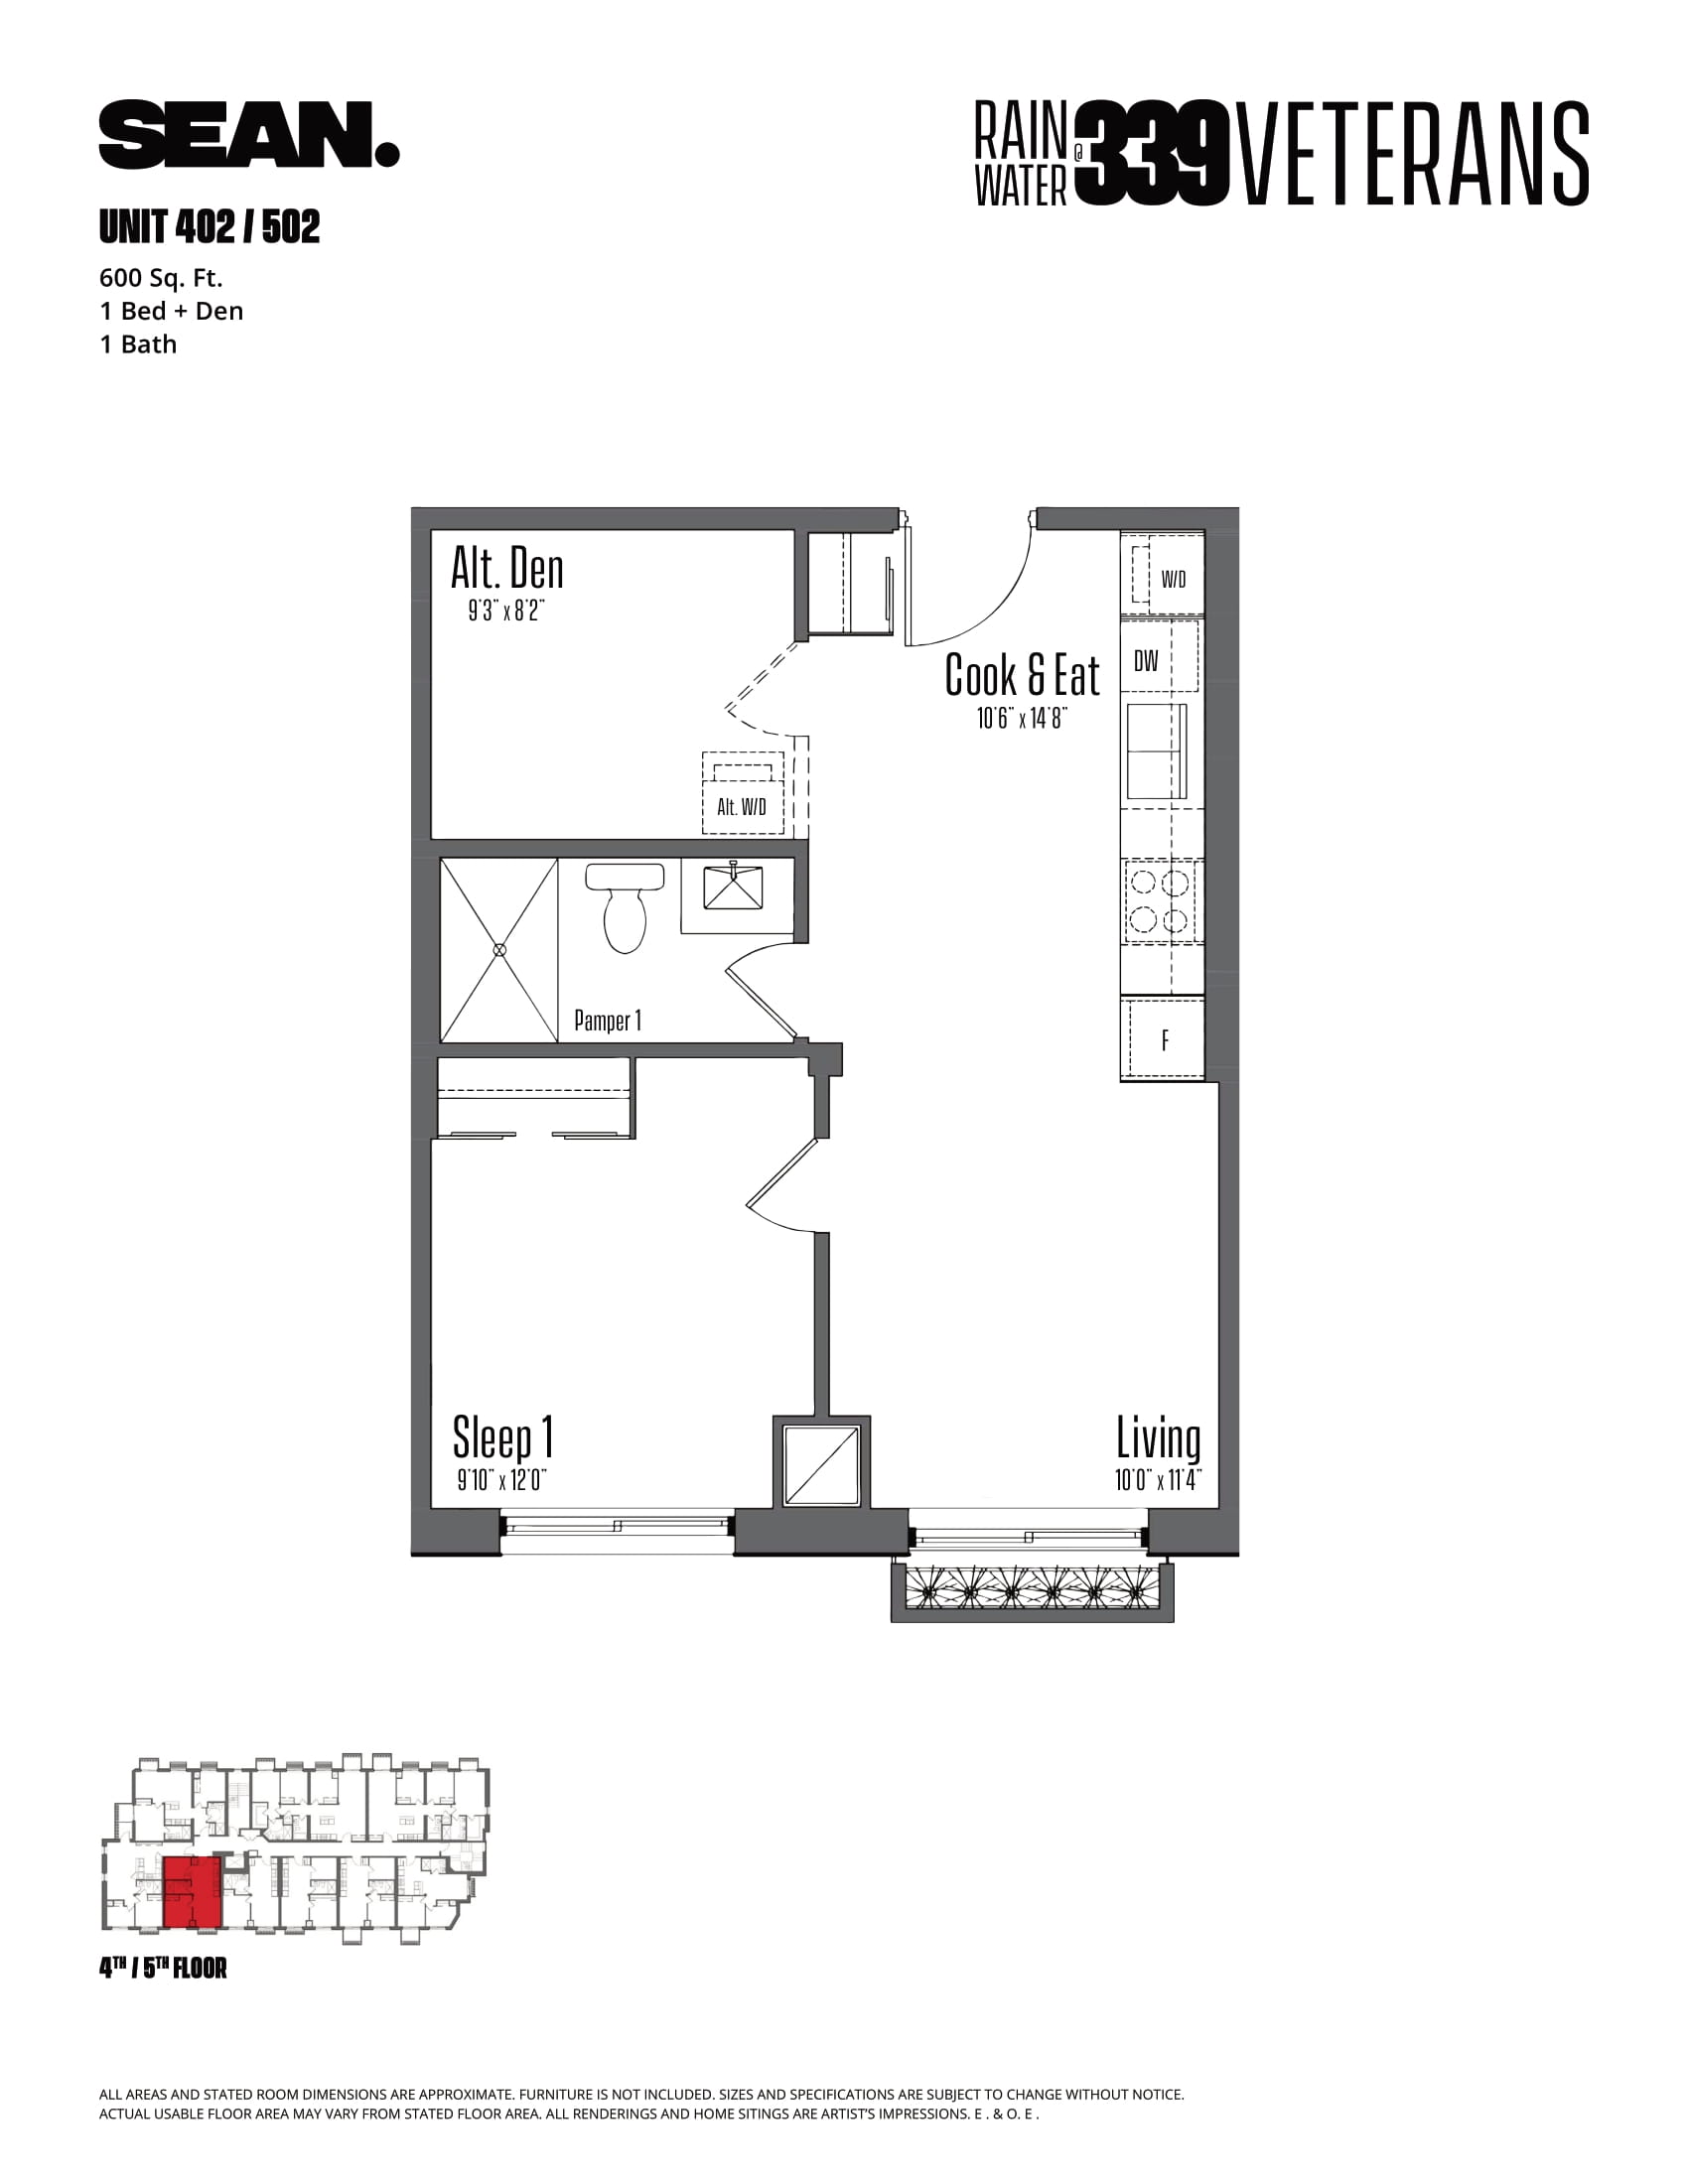  Floor Plan of Rainwater at 339 Veterans with undefined beds